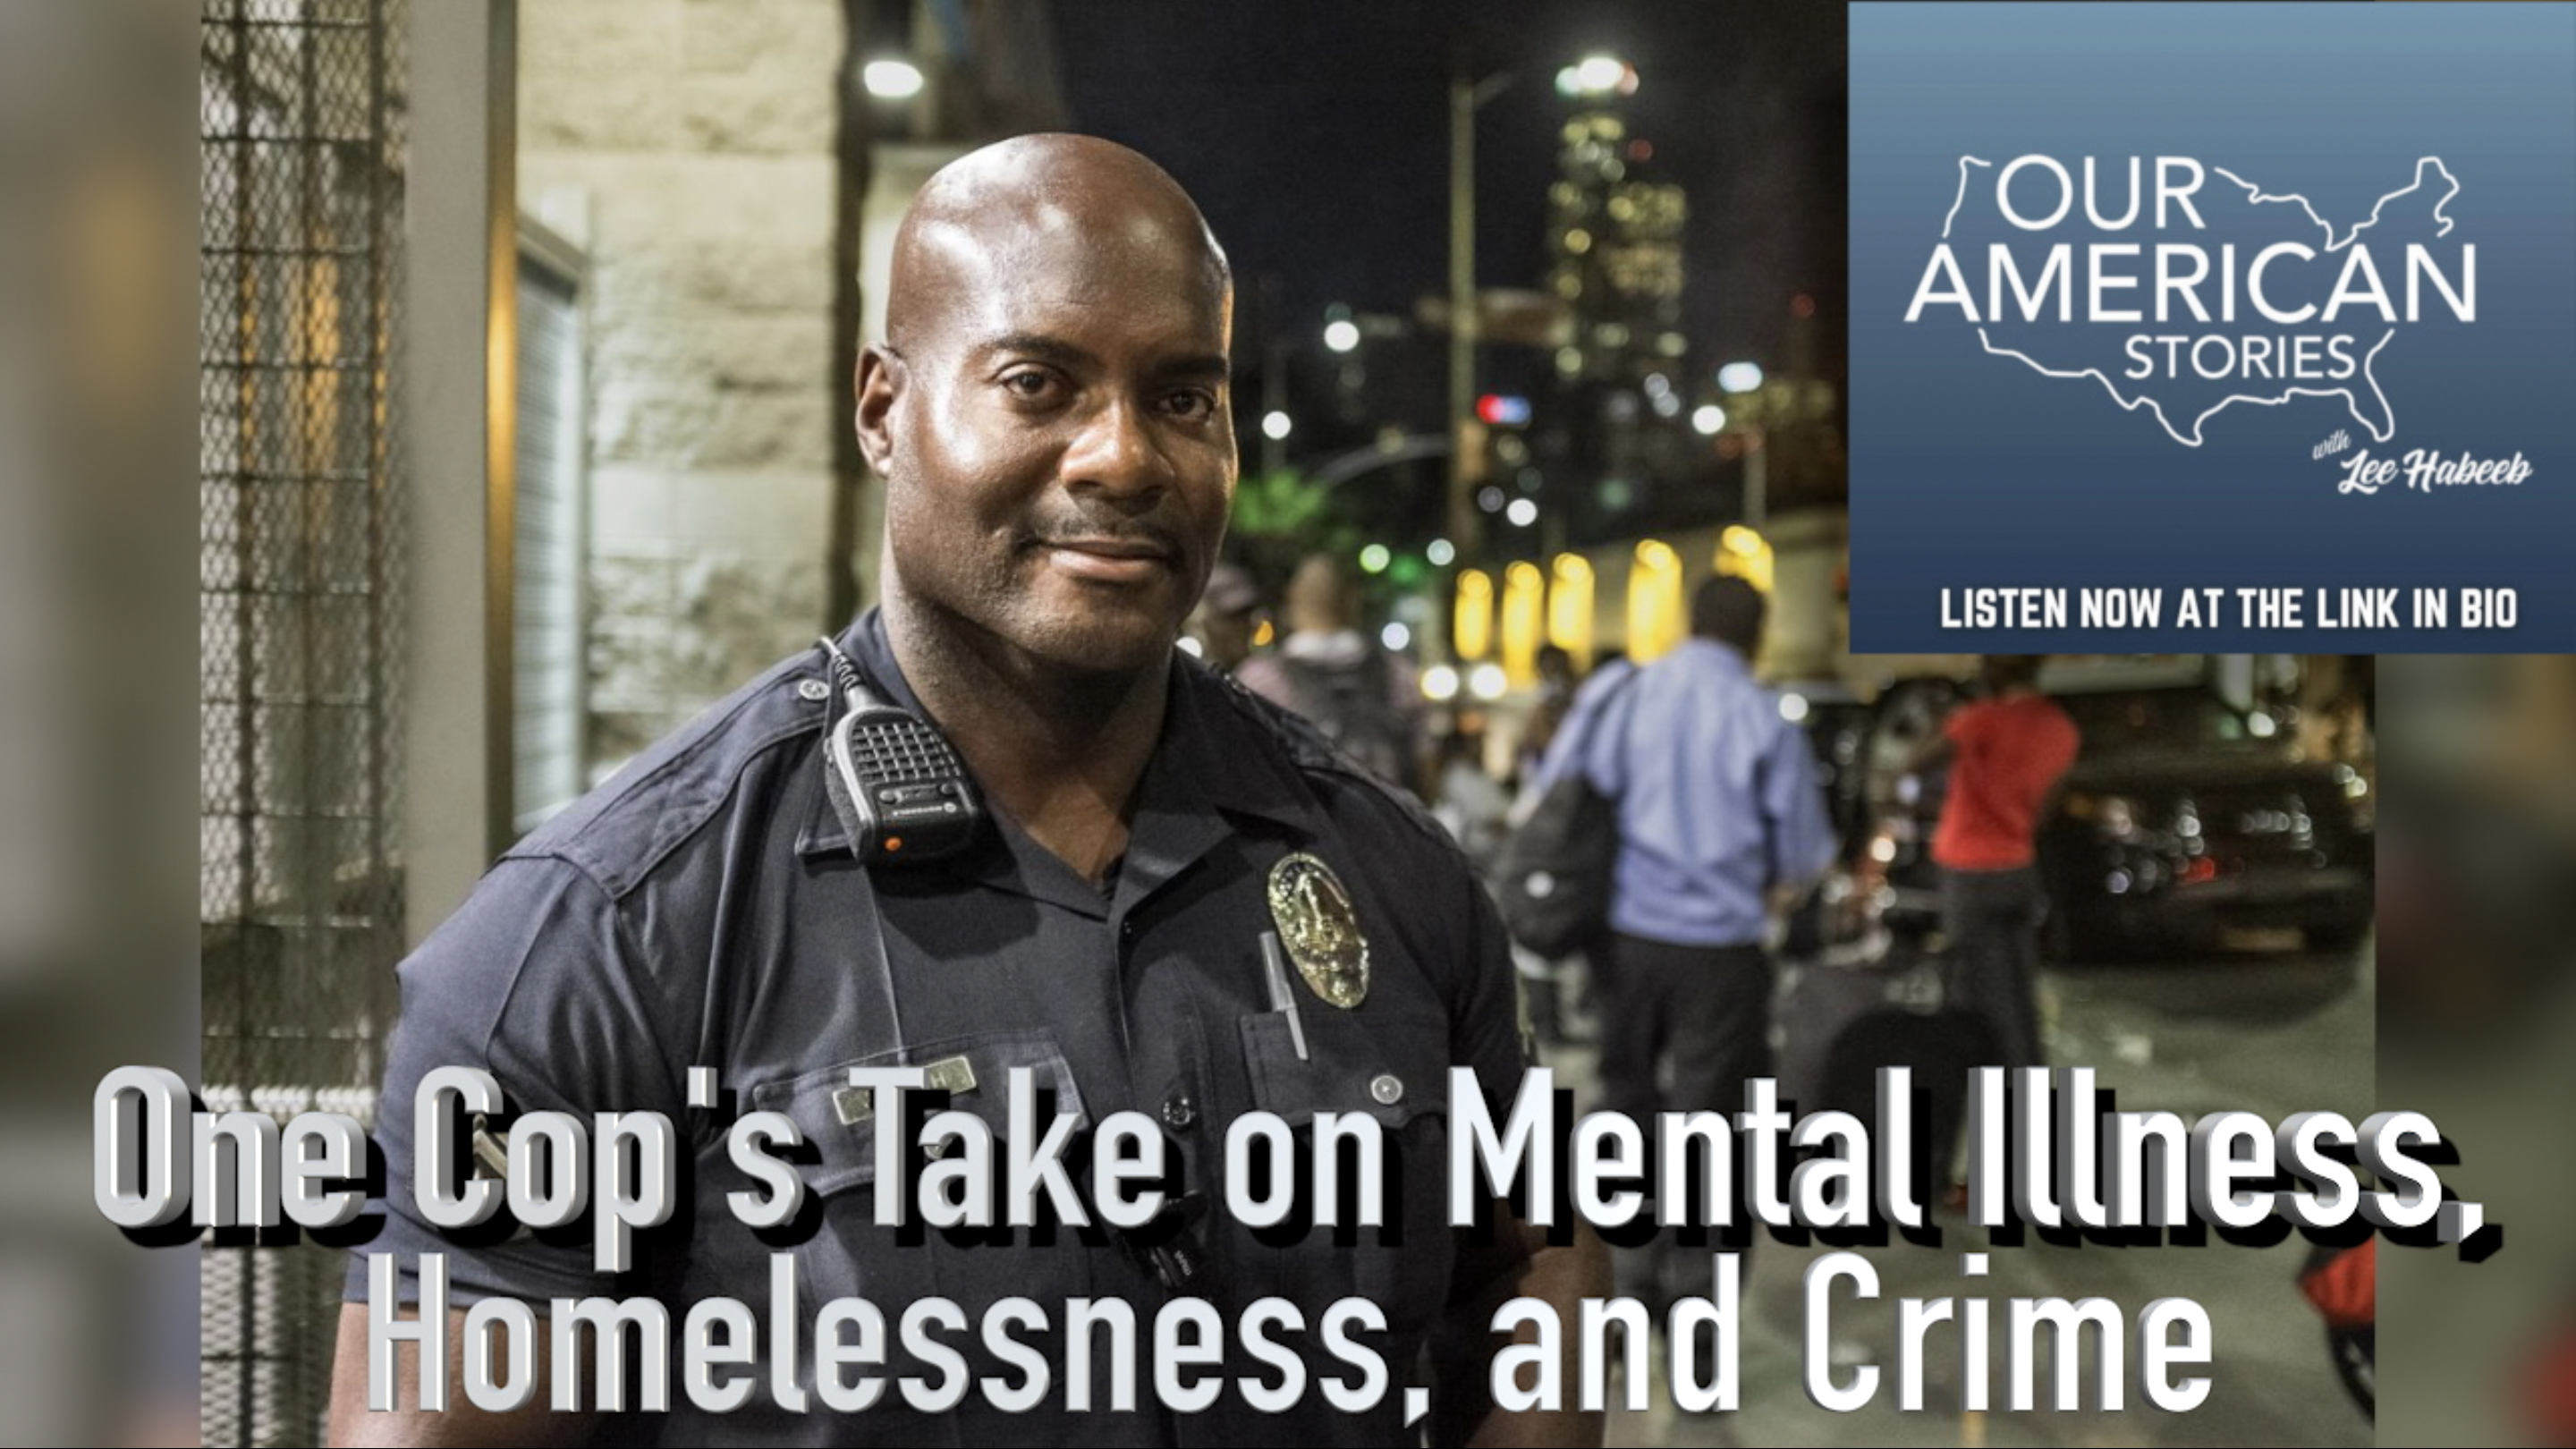 One Cop's Take on Mental Illness, Homelessness, and Crime